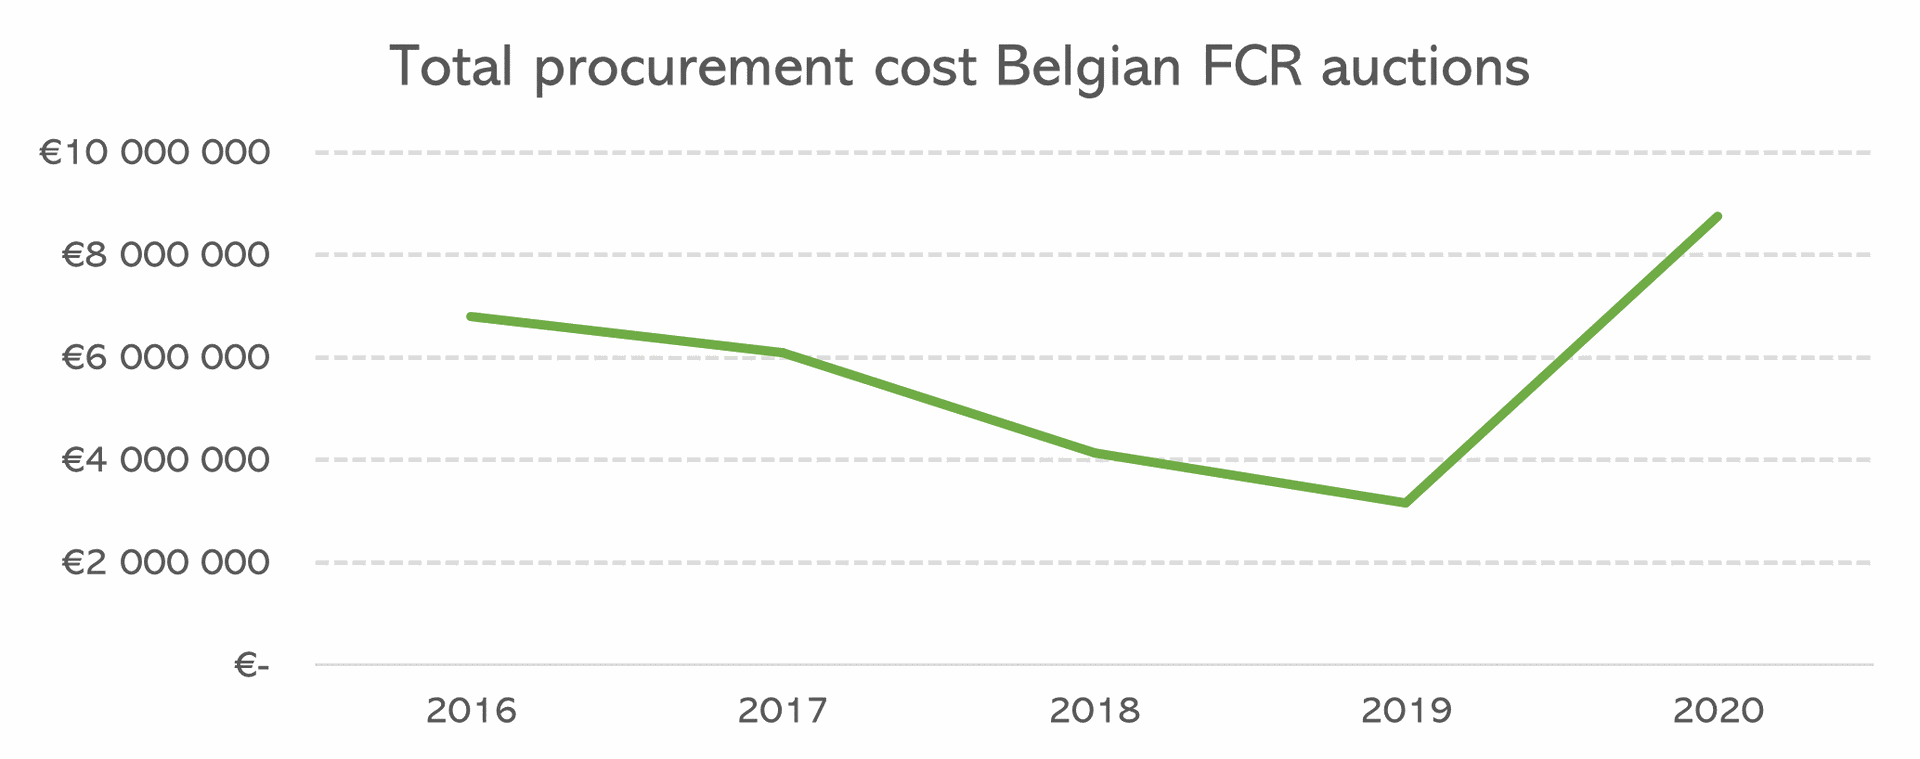 Results of Belgian FCR auctions